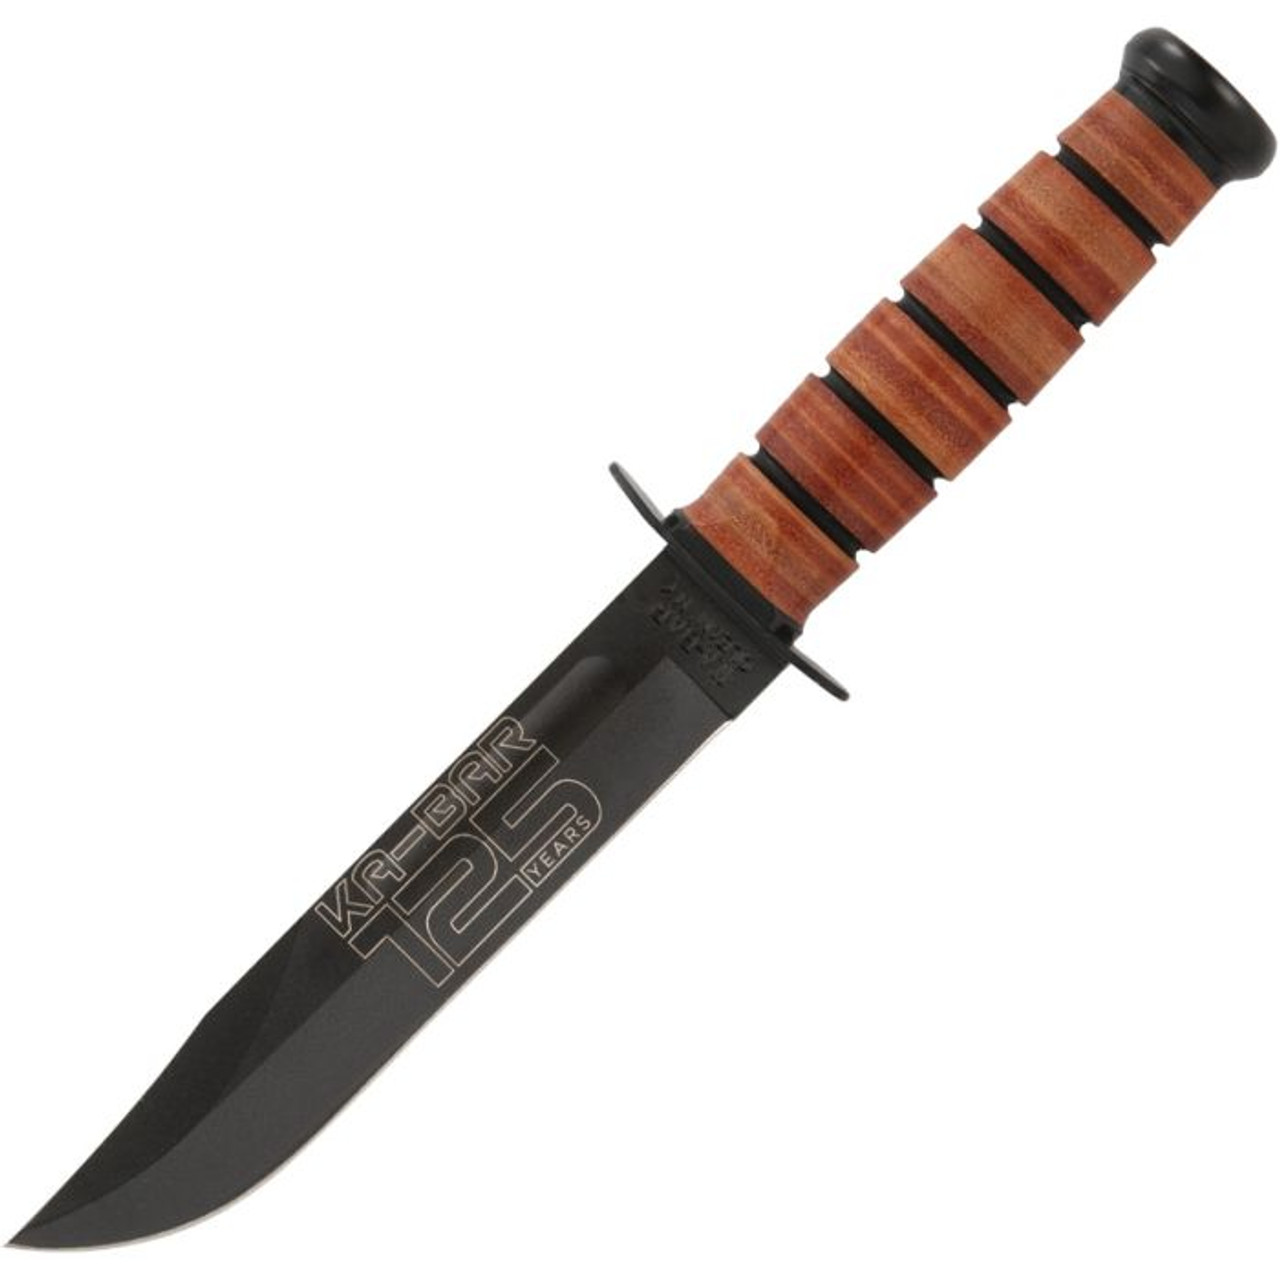 Ka-Bar 125th Annv USMC (KA9226) 7" 1095 Cro-Van Clip Point Plain Blade, Stacked Leather Handle with a Steel Guard and Pommel, Brown Leather Belt Sheath